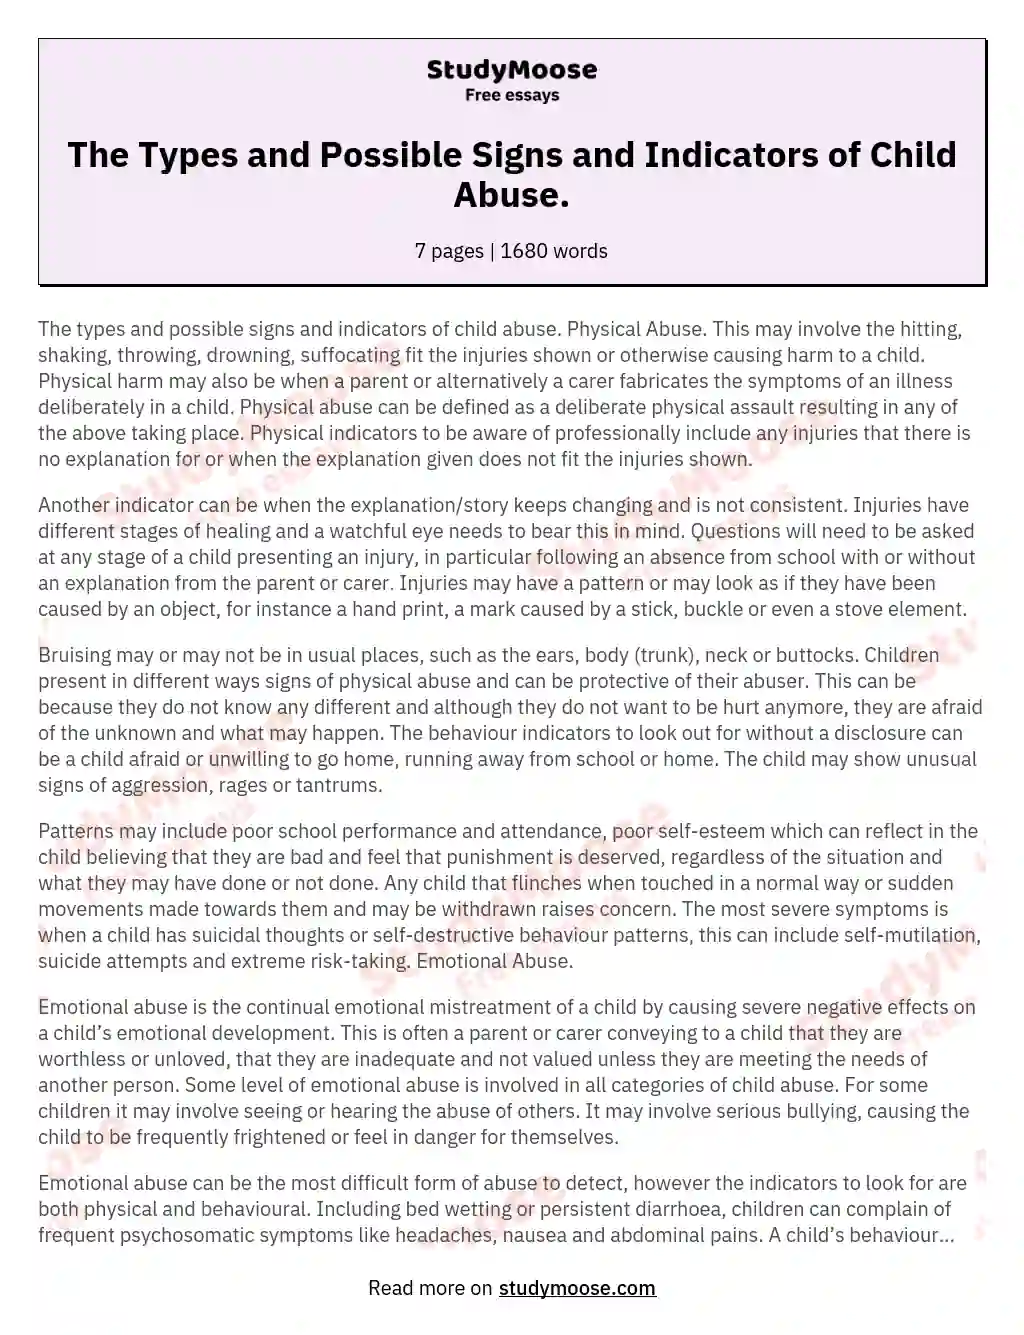 The Types and Possible Signs and Indicators of Child Abuse. essay